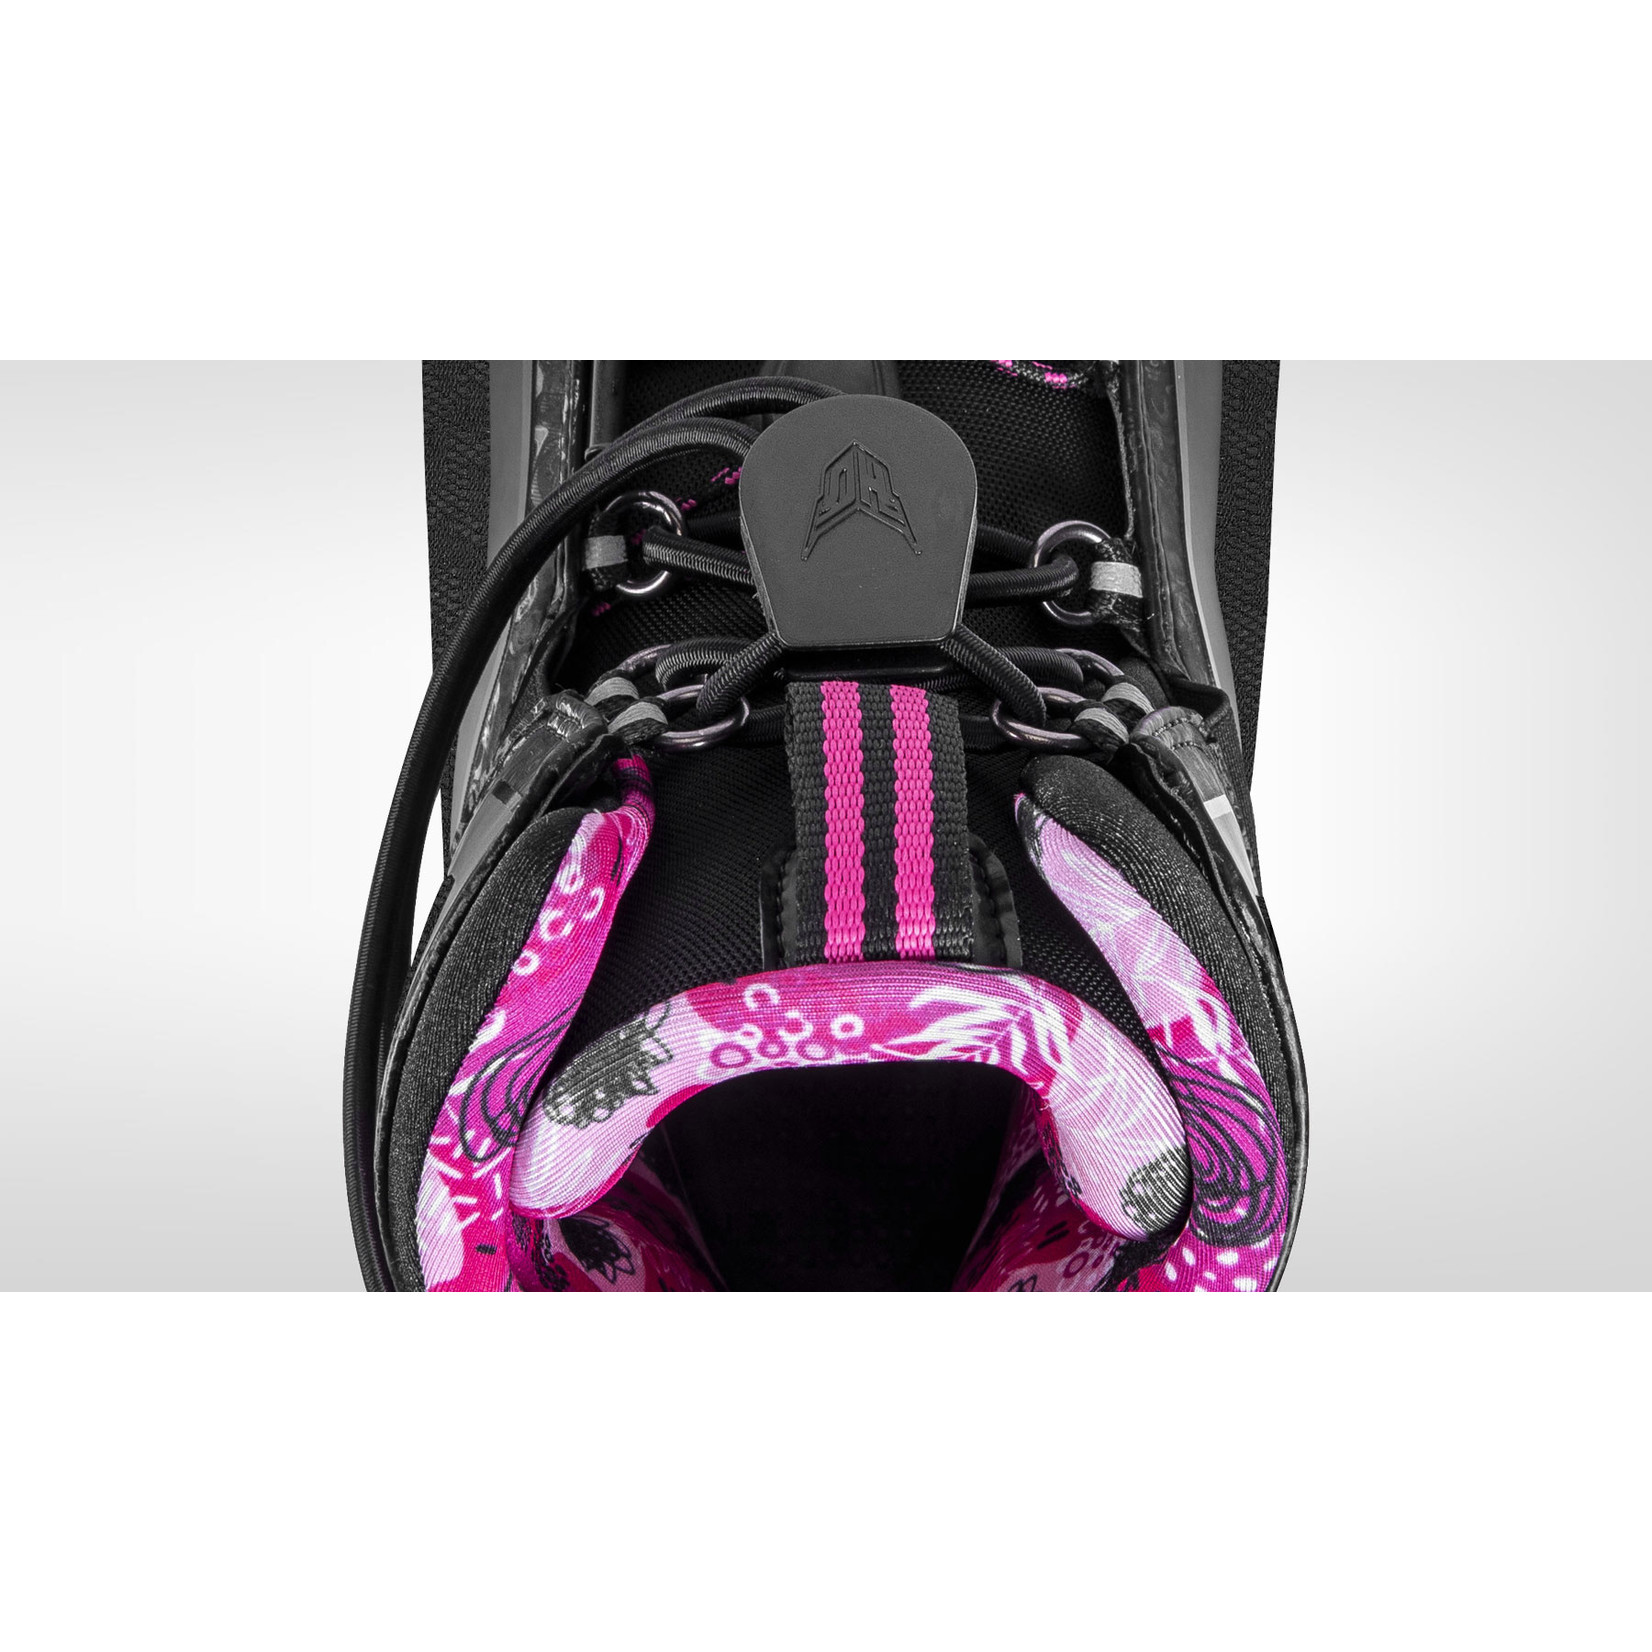 HO/Hyperlite Women's Stance 110 Direct Connect 5.5-9.5